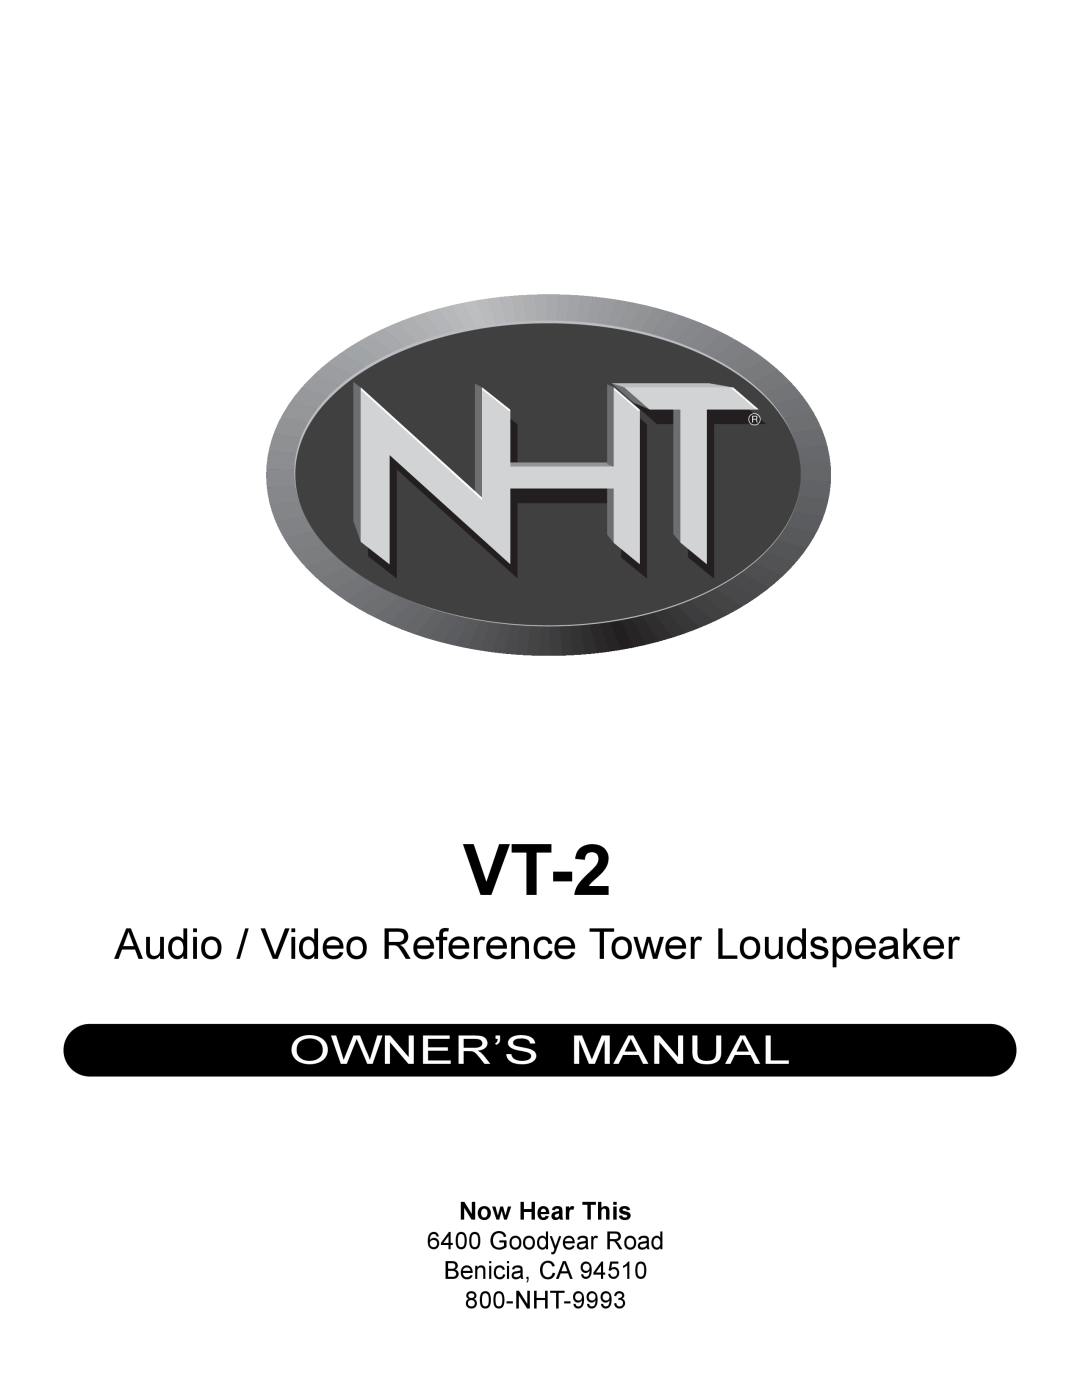 NHT VT-2 owner manual Now Hear This, Audio / Video Reference Tower Loudspeaker, Goodyear Road Benicia, CA 800-NHT-9993 